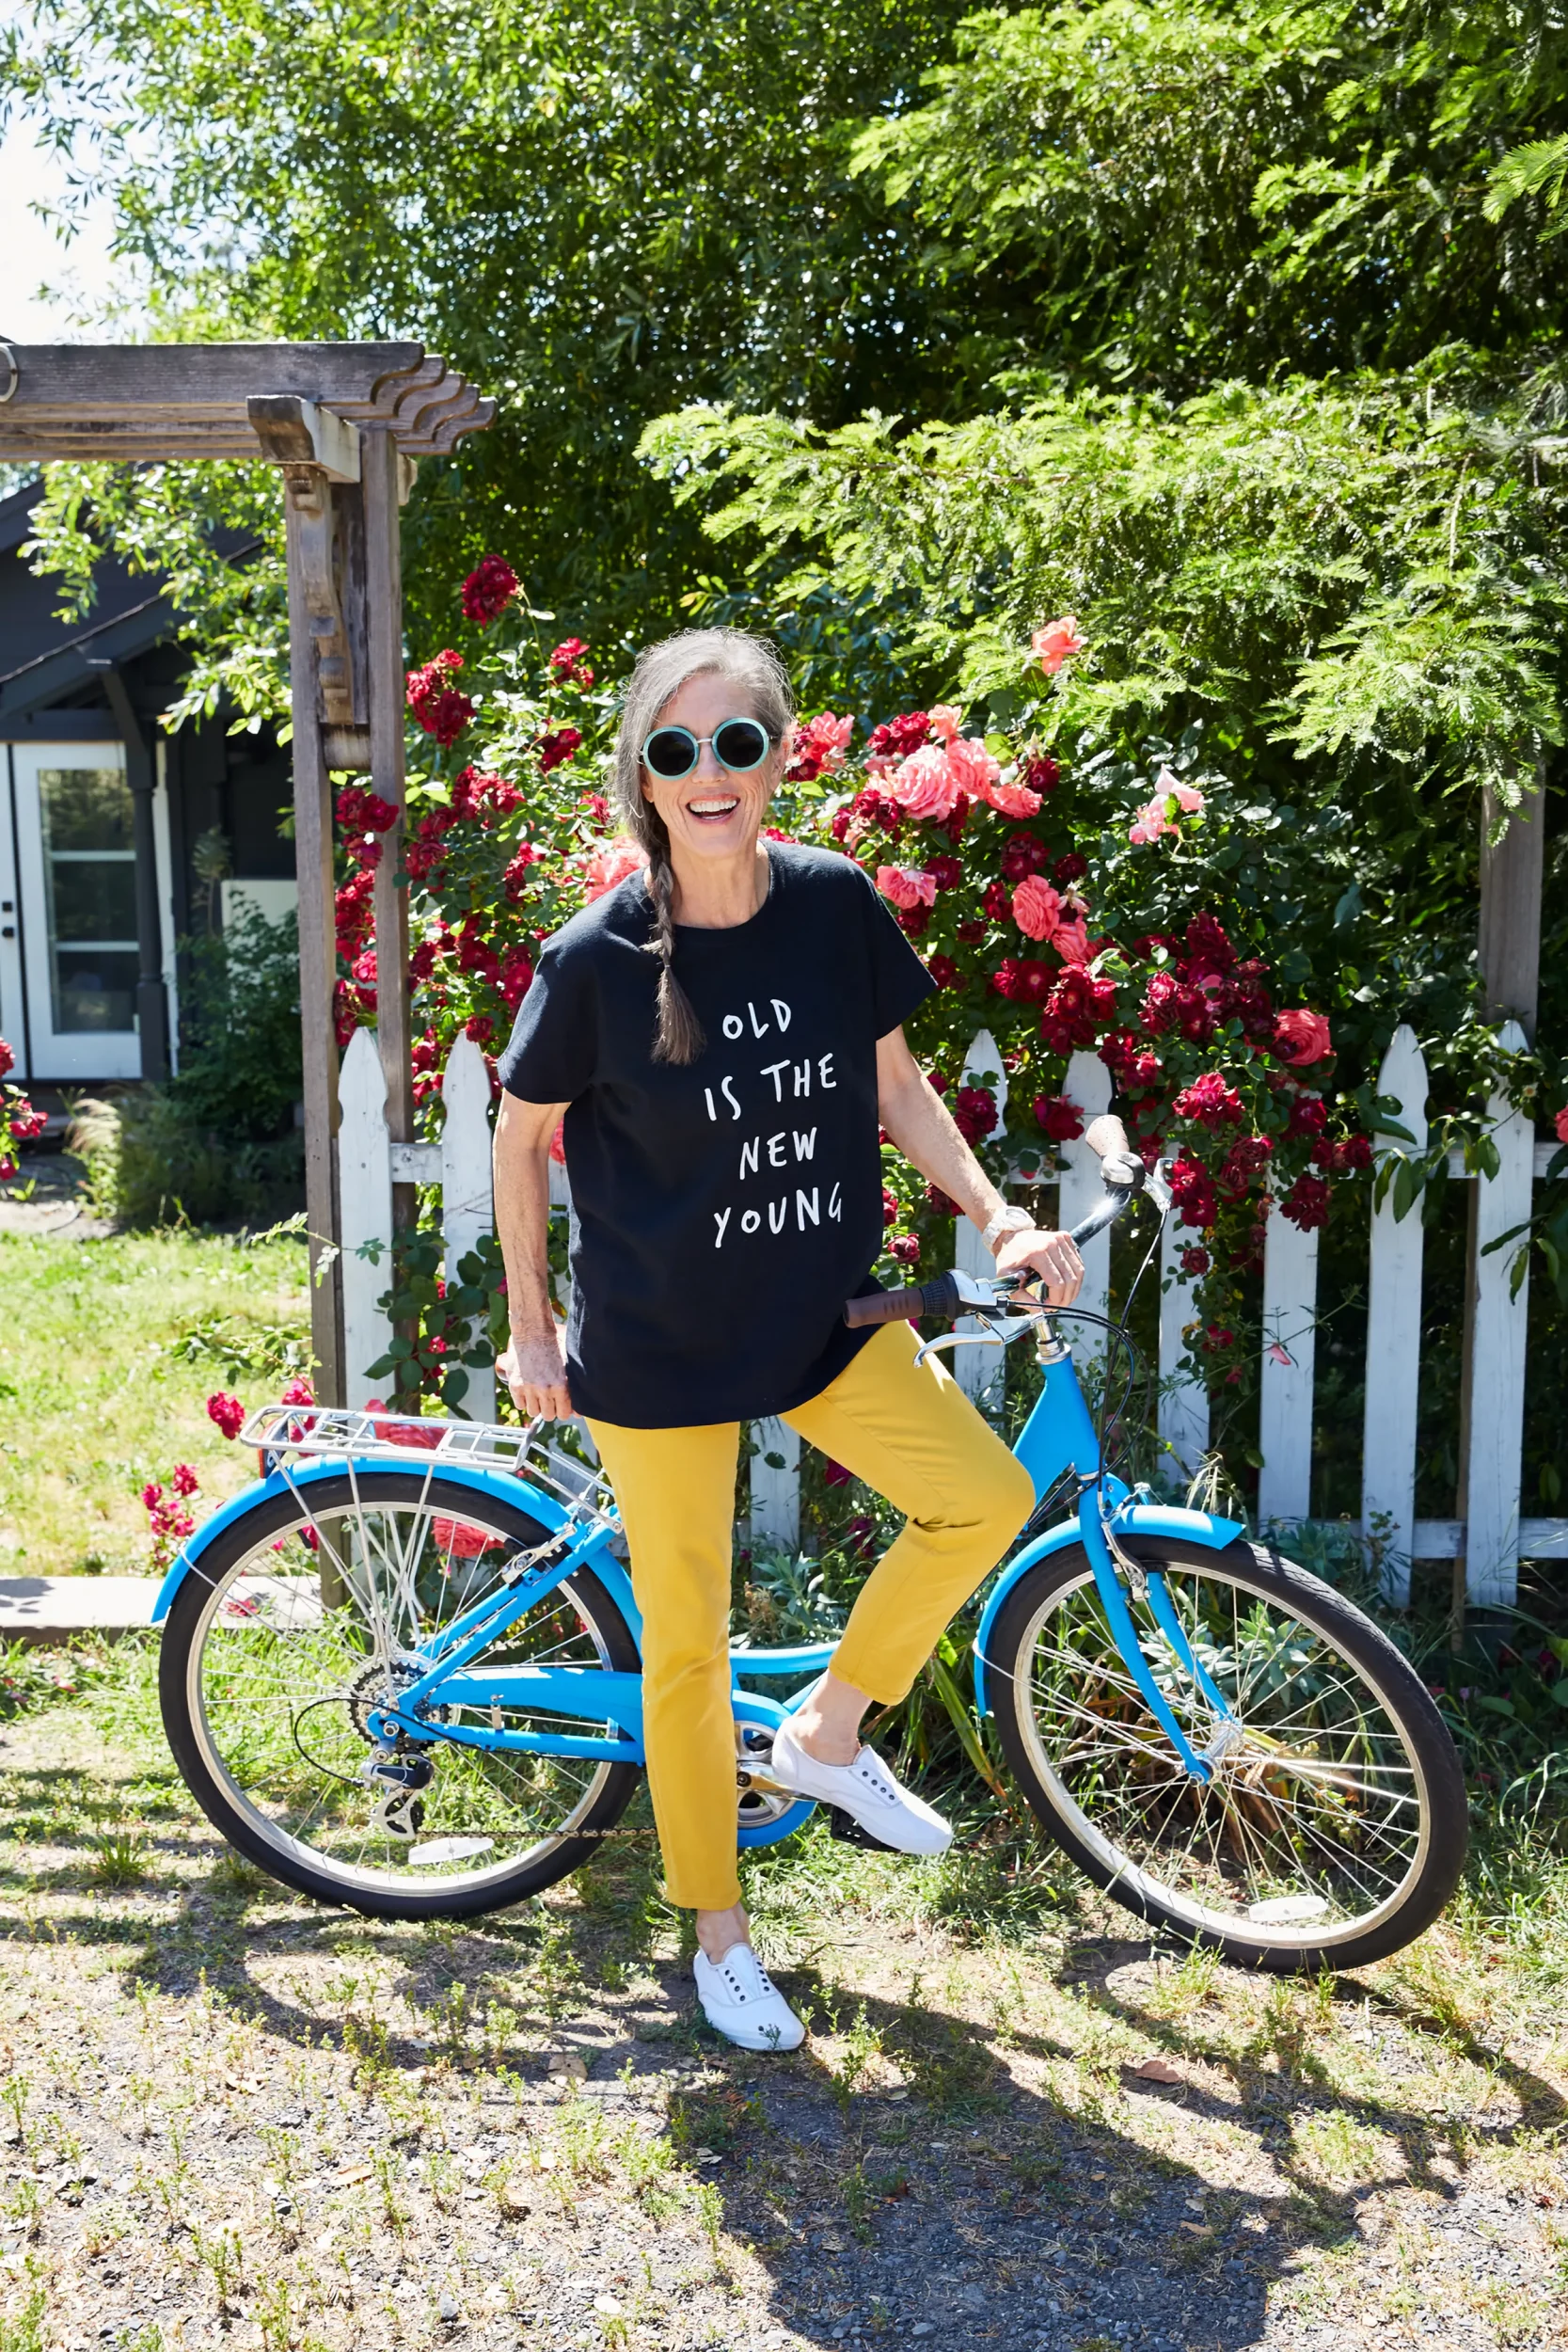 independent living resident standing by bike with old is the new young shirt